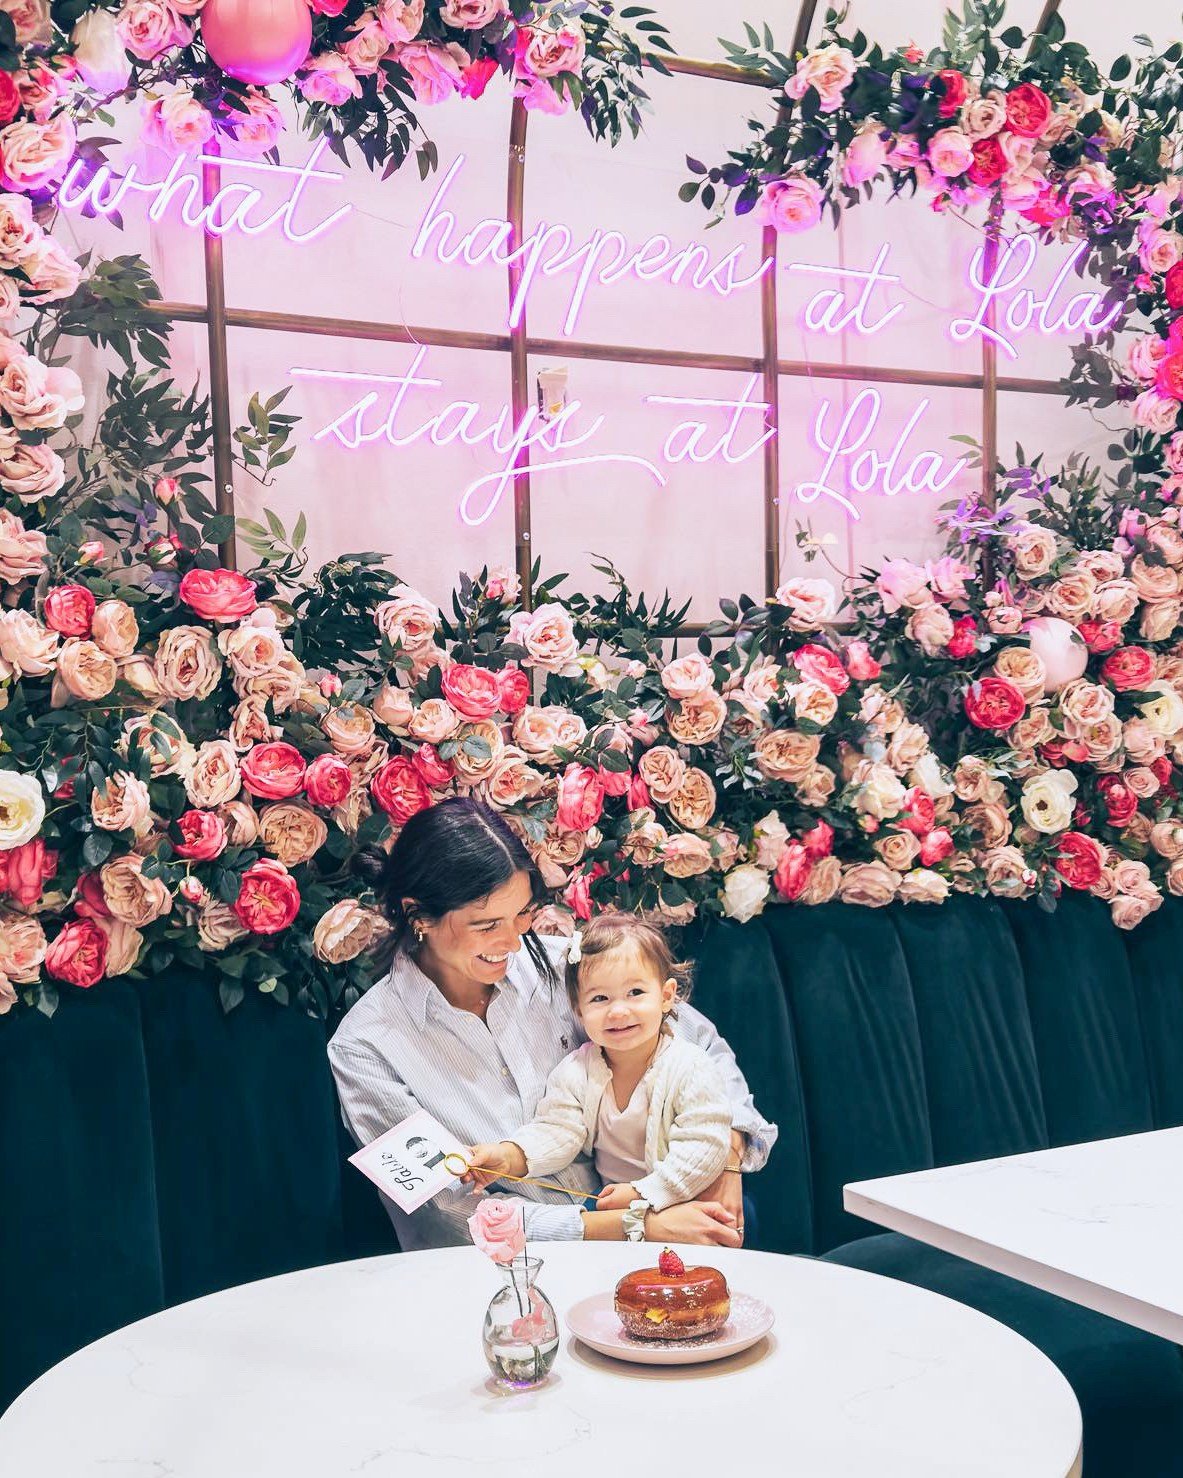 Mother's Day is almost here and there's no place we'd rather be!

Enjoy an iced drink &amp; your favorite pastries when you stop by! 😍

📸: @arianedupuis

📍4280 S Hualapai Way, Ste #109 &bull;☎️(702)766-5652
📍10075 S Eastern Ave., #109 ☎️(702) 840